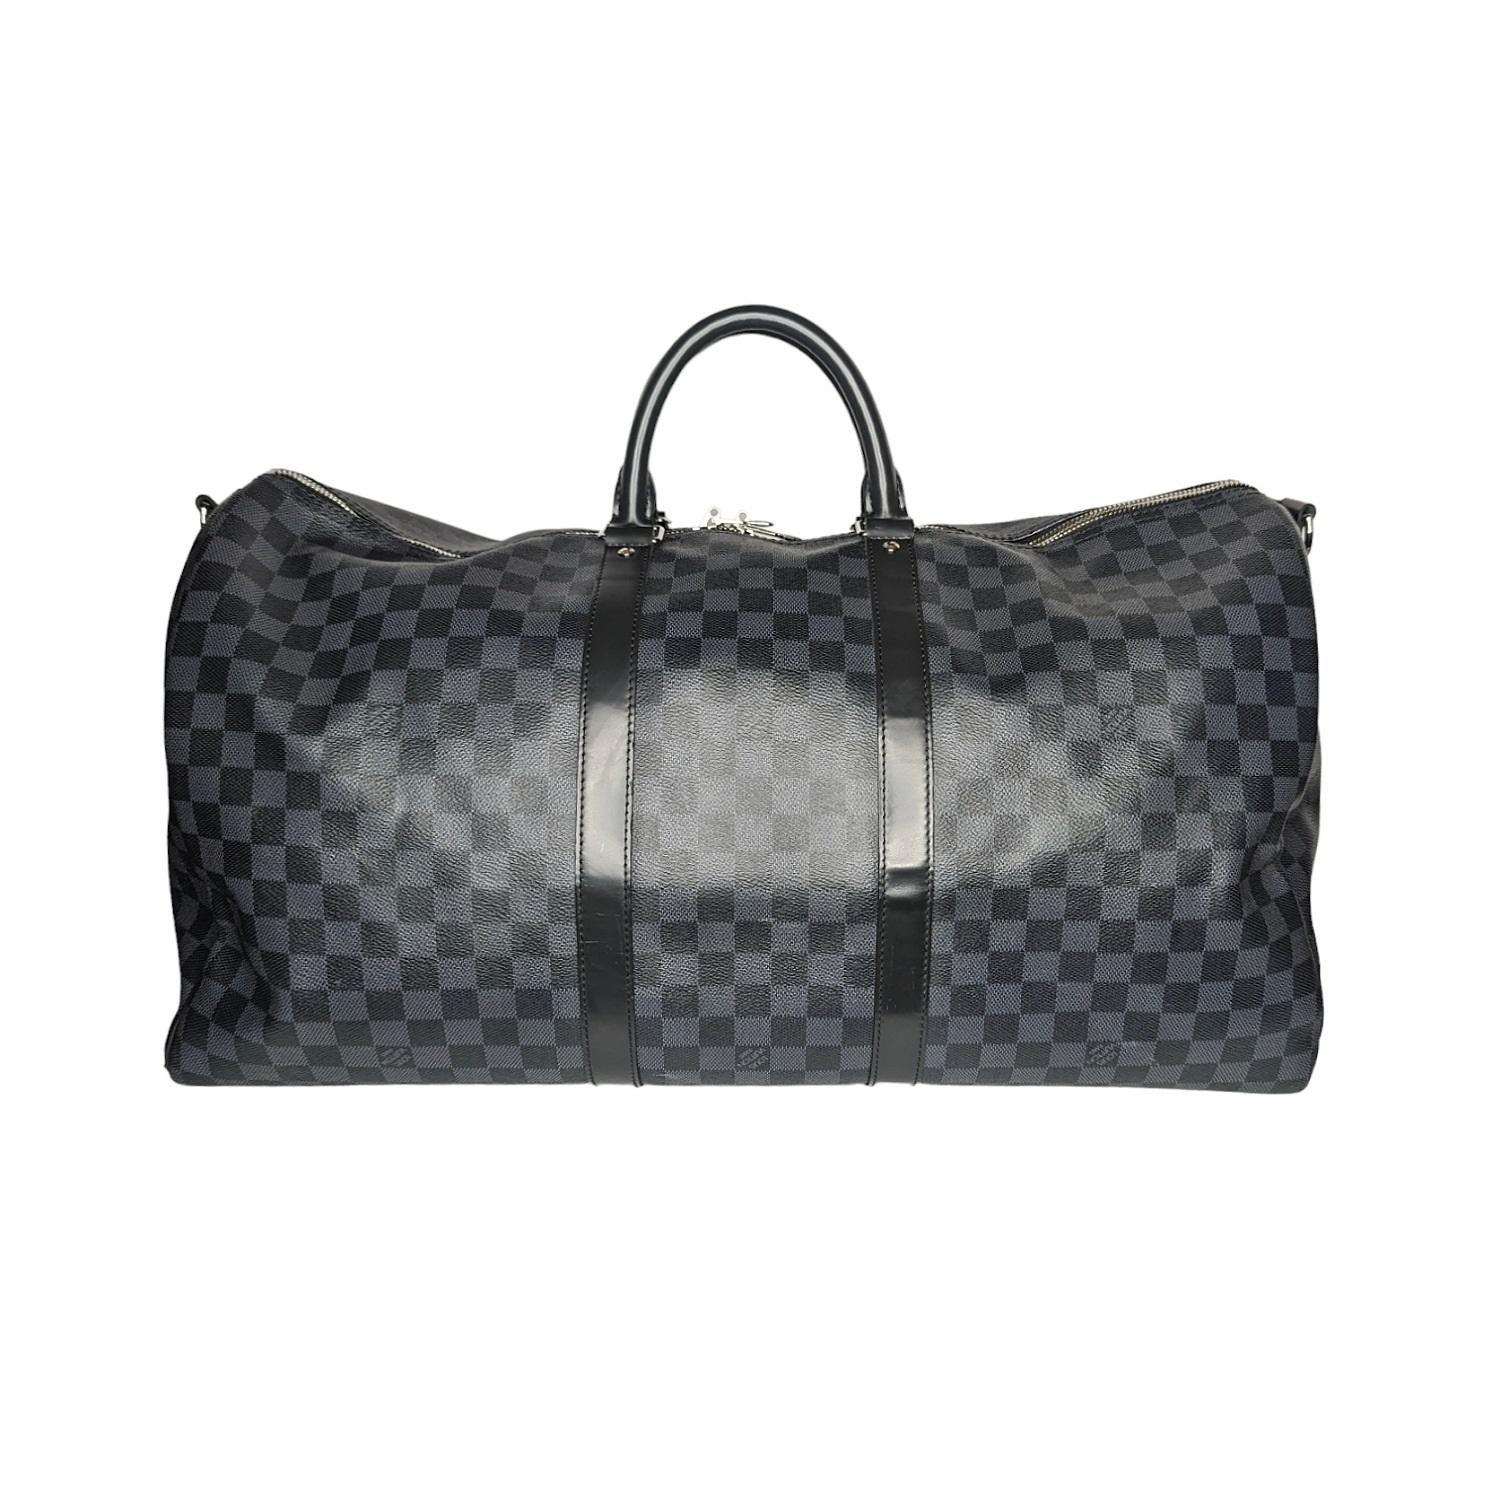 Louis Vuitton Damier Graphite Keepall Bandouliere 55. This travel bag is crafted of Louis Vuitton's signature Damier check canvas in black and gray. It features sturdy black rolled leather top handles, a removable shoulder strap, silver hardware,